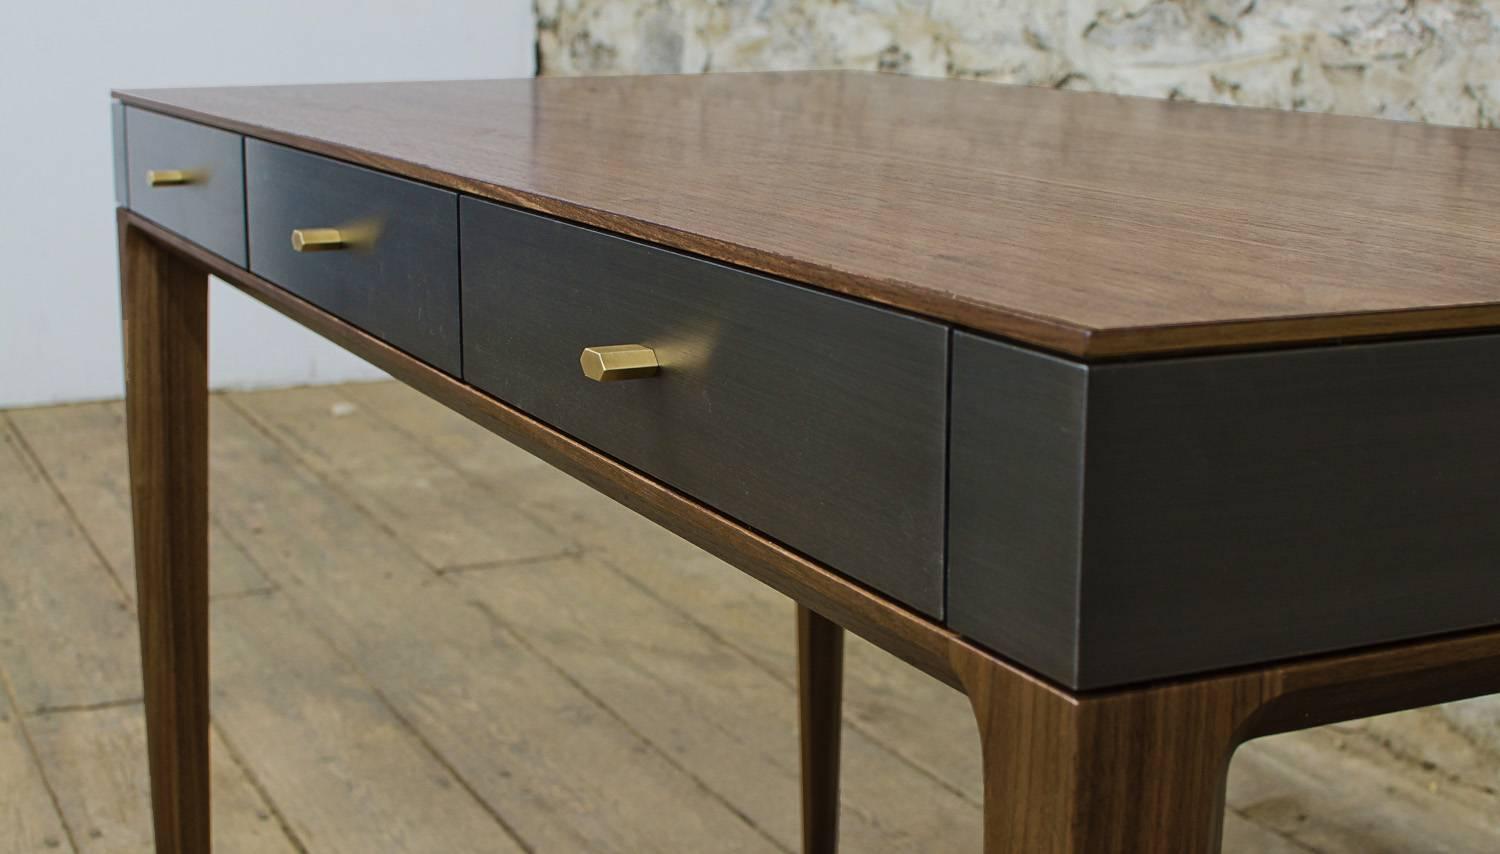 Shown in oiled walnut and gunmetal steel with burnished bronze hardware, the Tulare desk features three solid wood drawers, custom-made hardware and hand applied finishes.
Dimensions (as pictured): 52